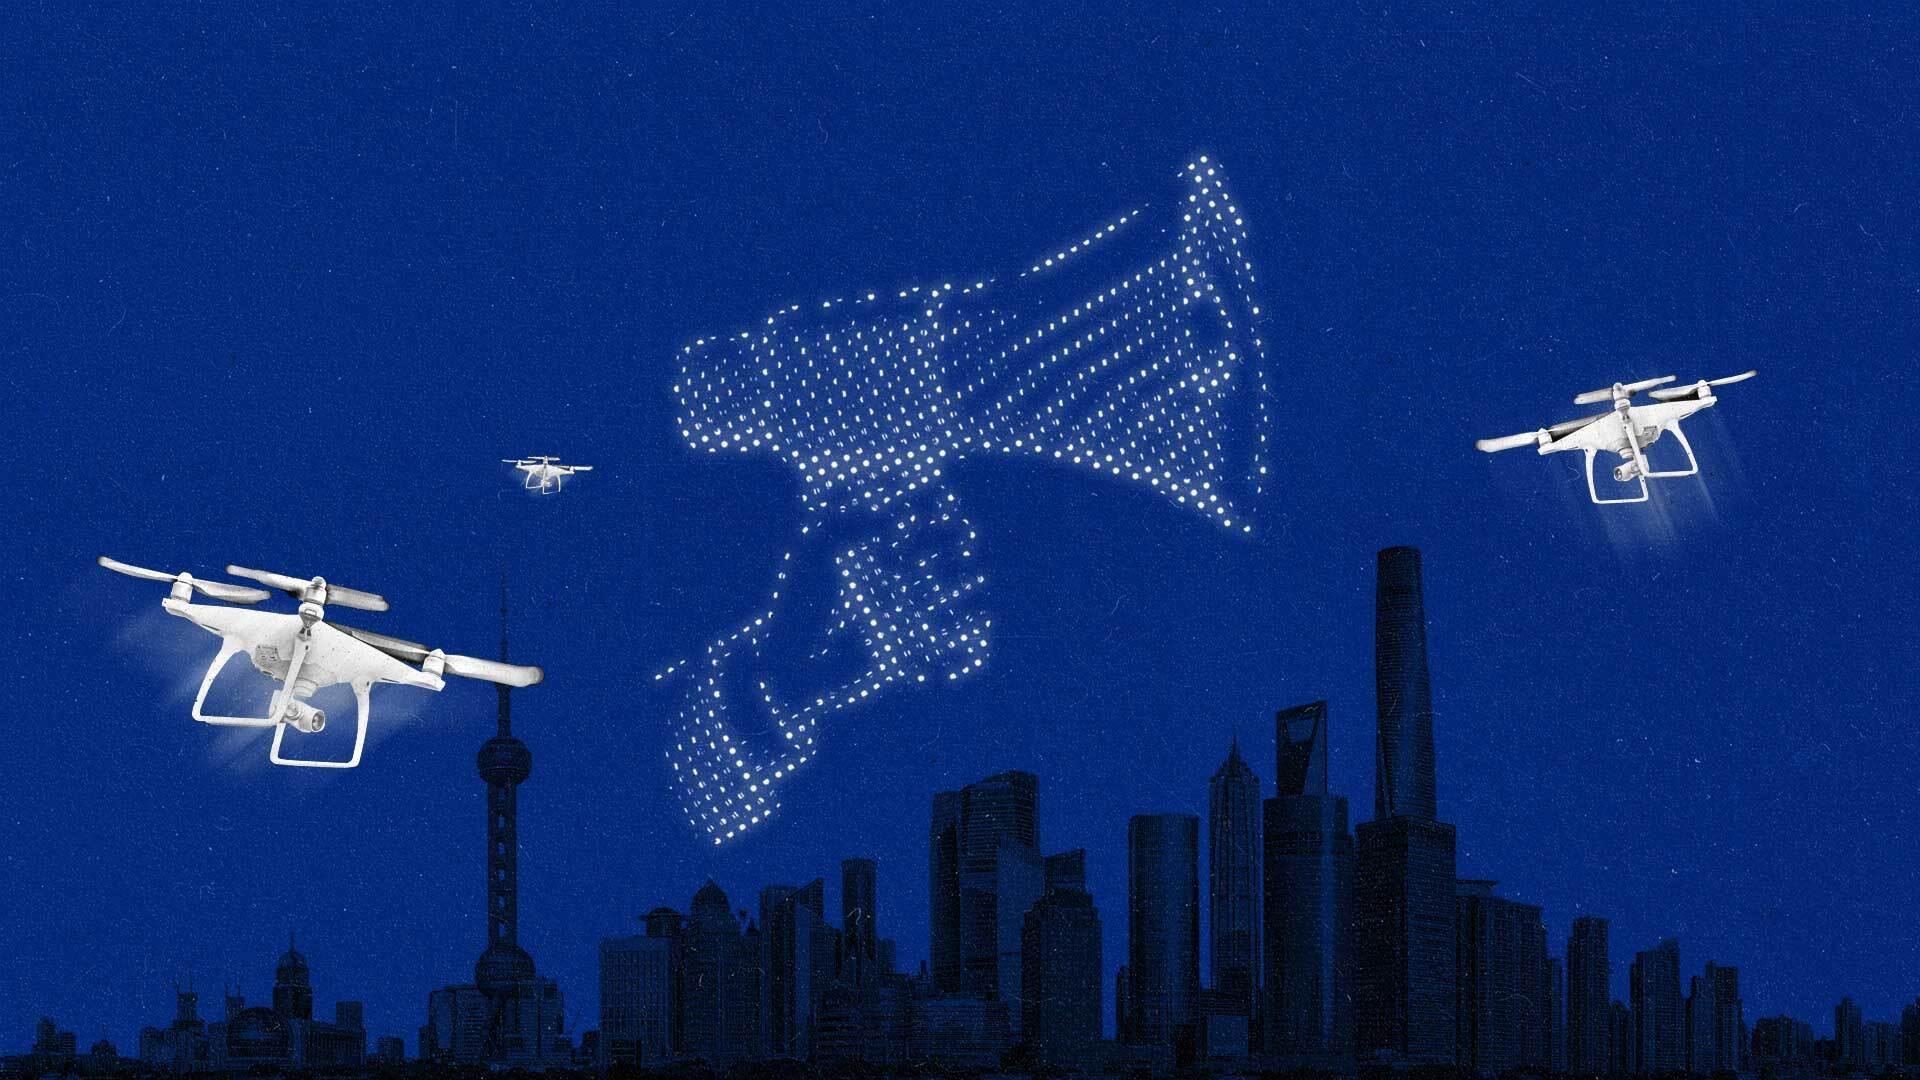 A series of drones form a hand holding a megaphone above the Shanghai skyline.